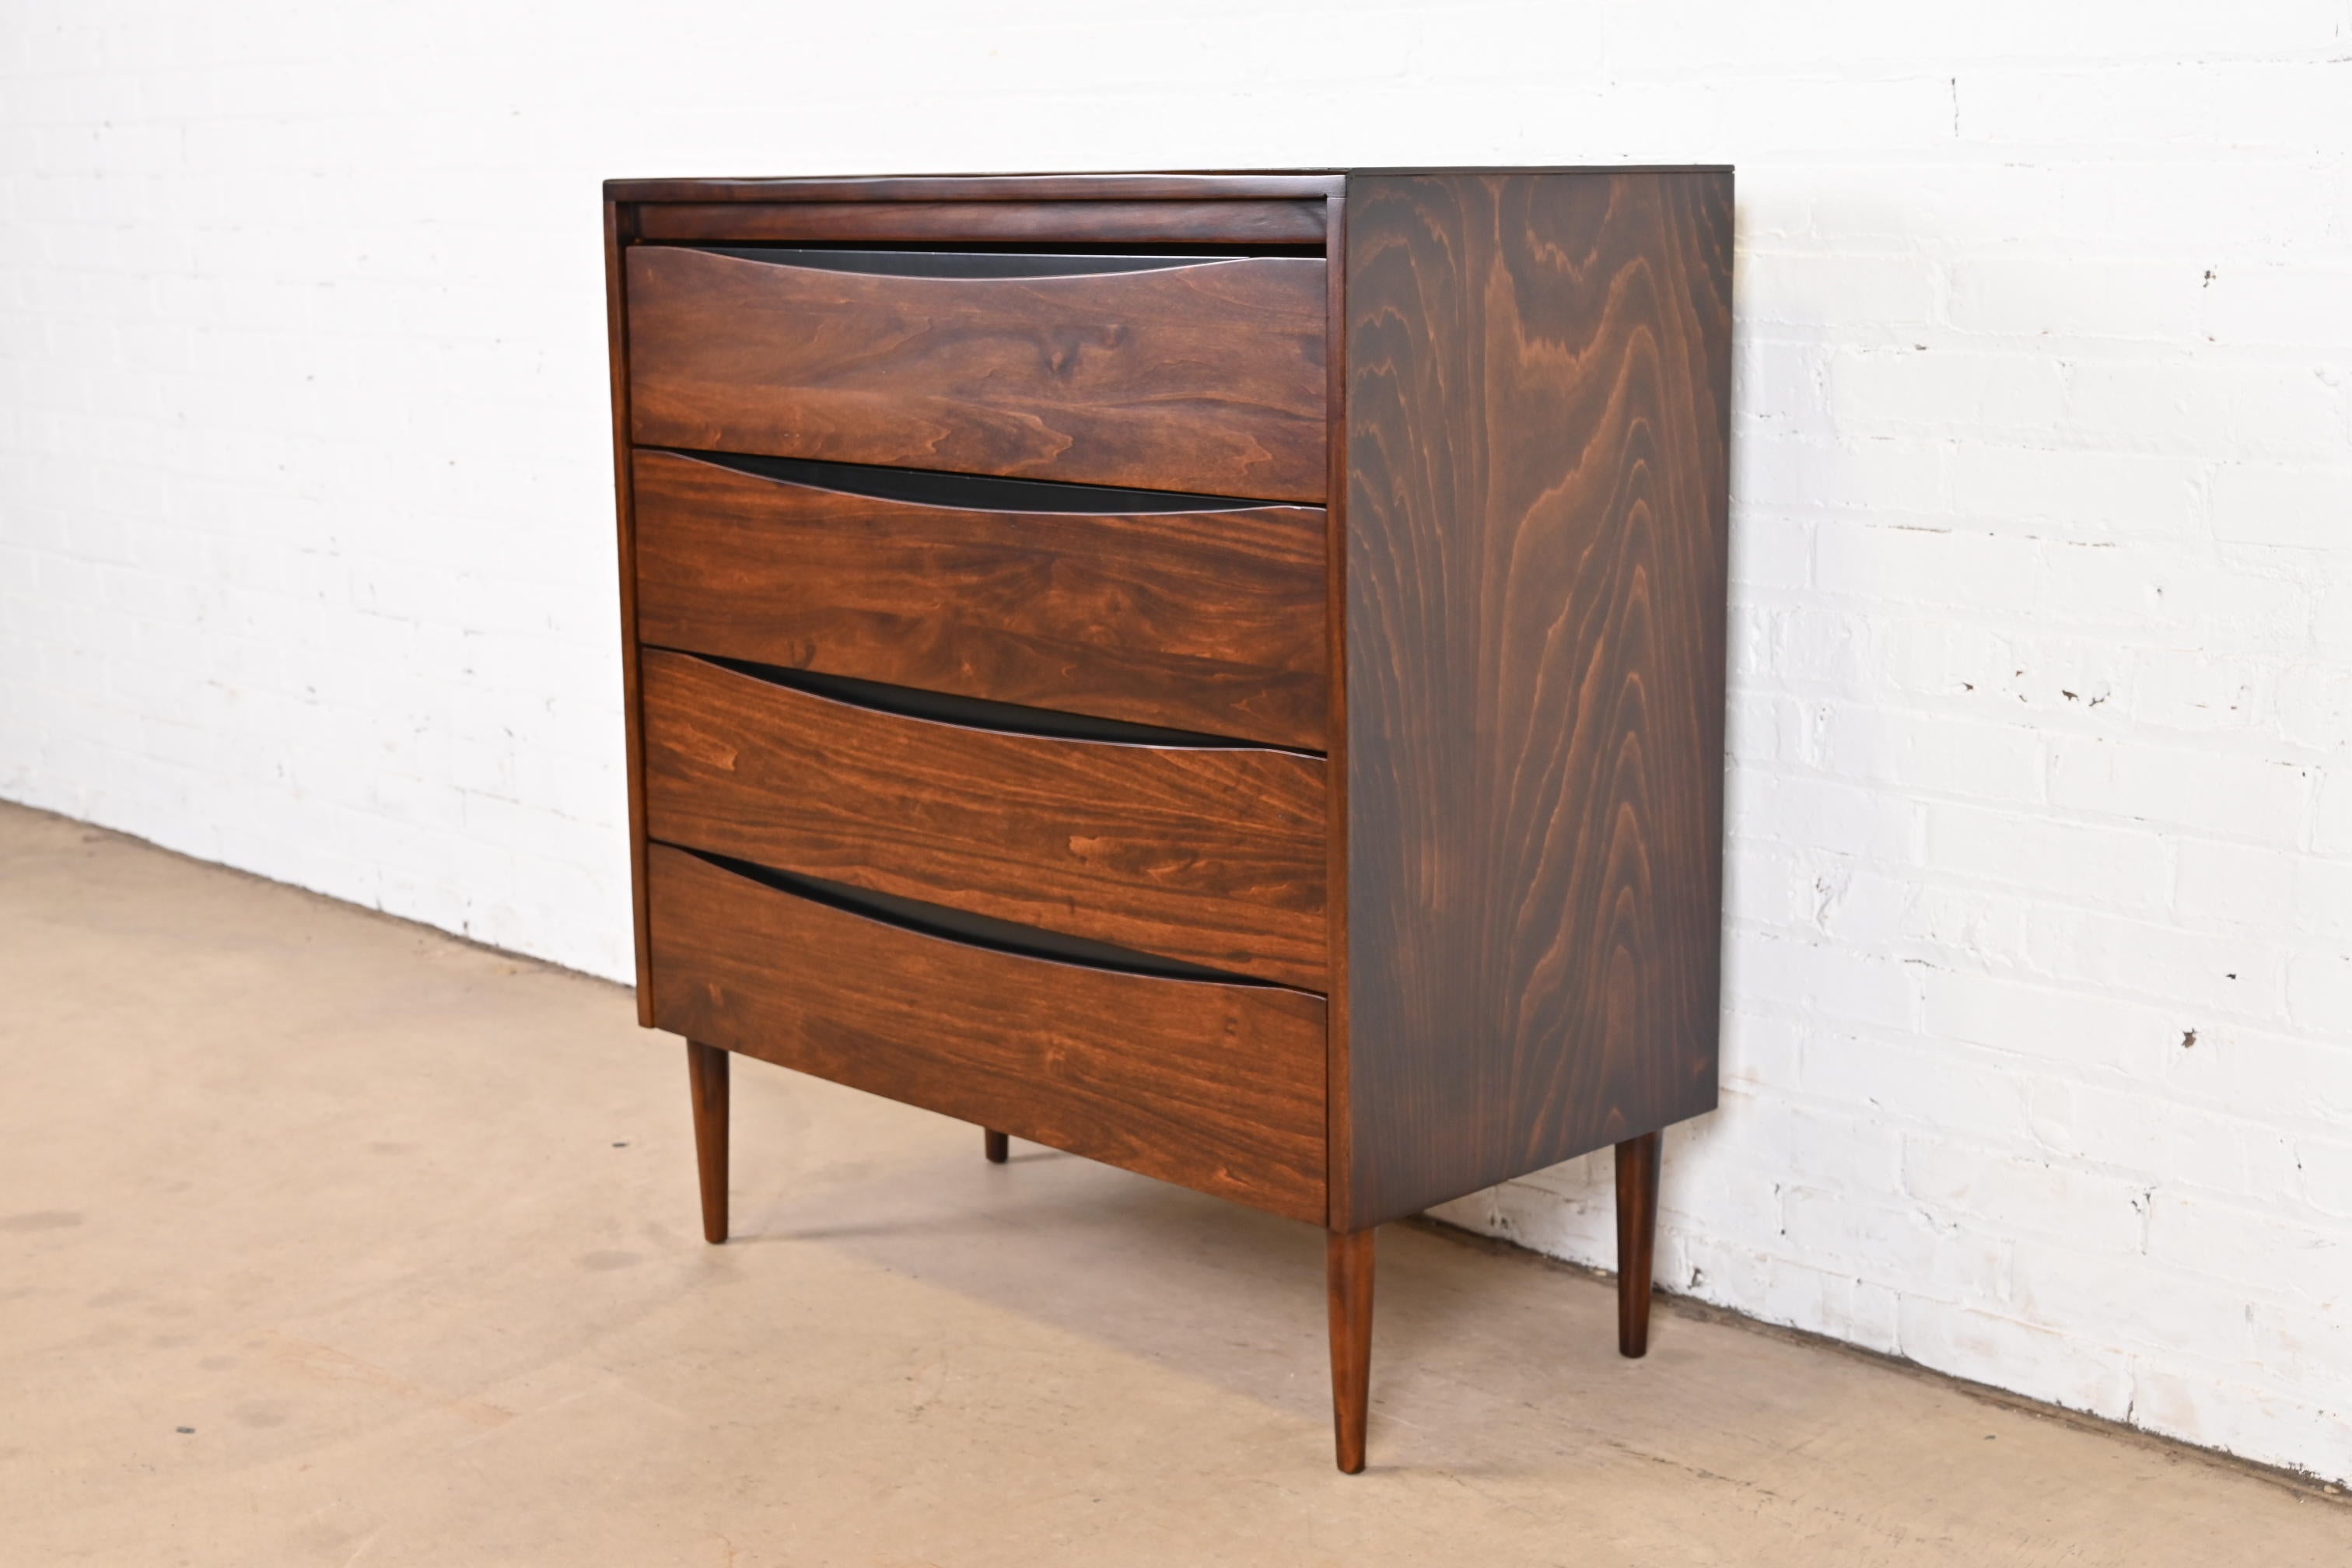 An exceptional Mid-Century Modern four-drawer dresser or chest of drawers
By Paul McCobb for Child Craft
USA, 1950s.
Gorgeous birch wood, with black lacquered recessed drawer pulls.
Measures: 34